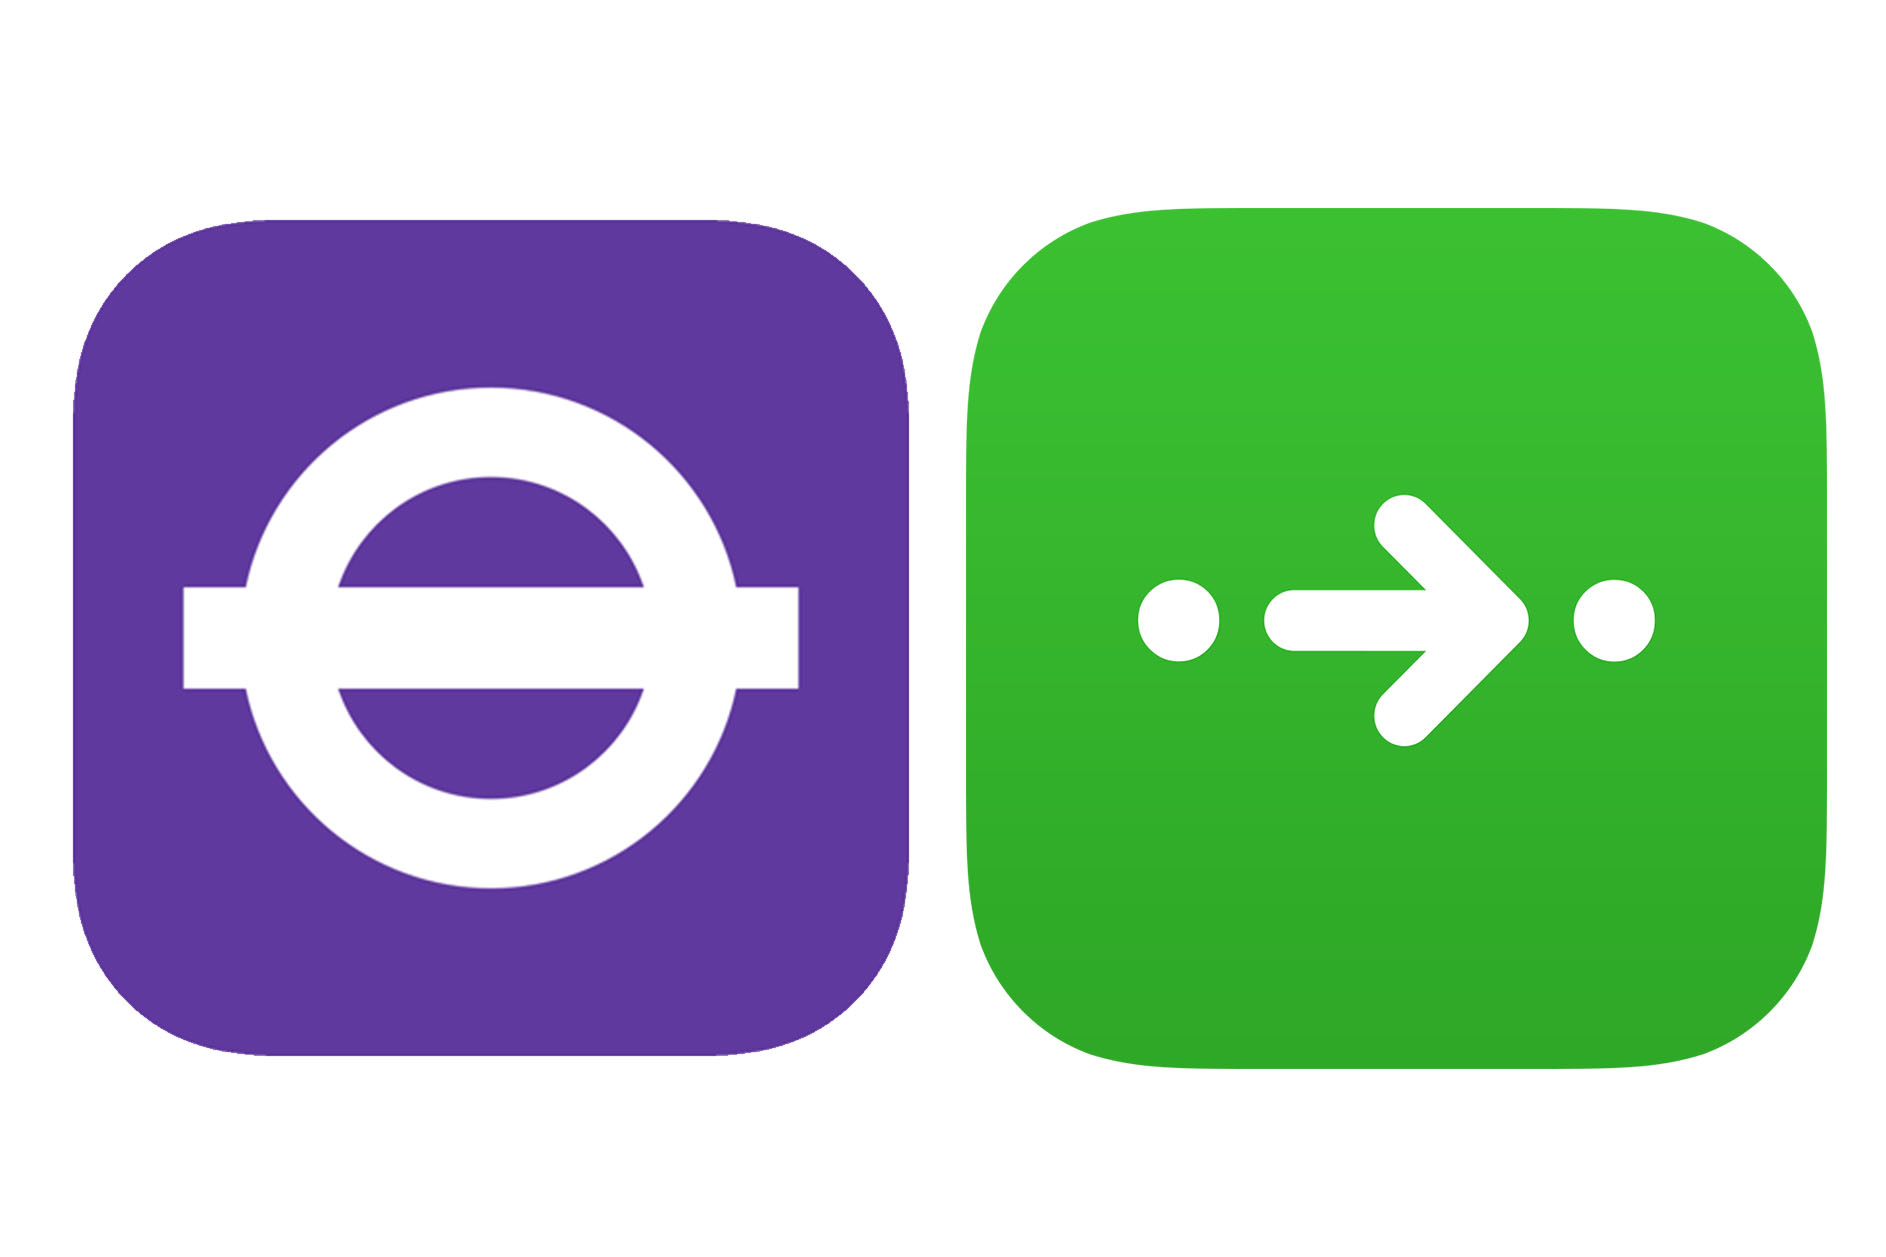 tfl go and citymapper apps for london